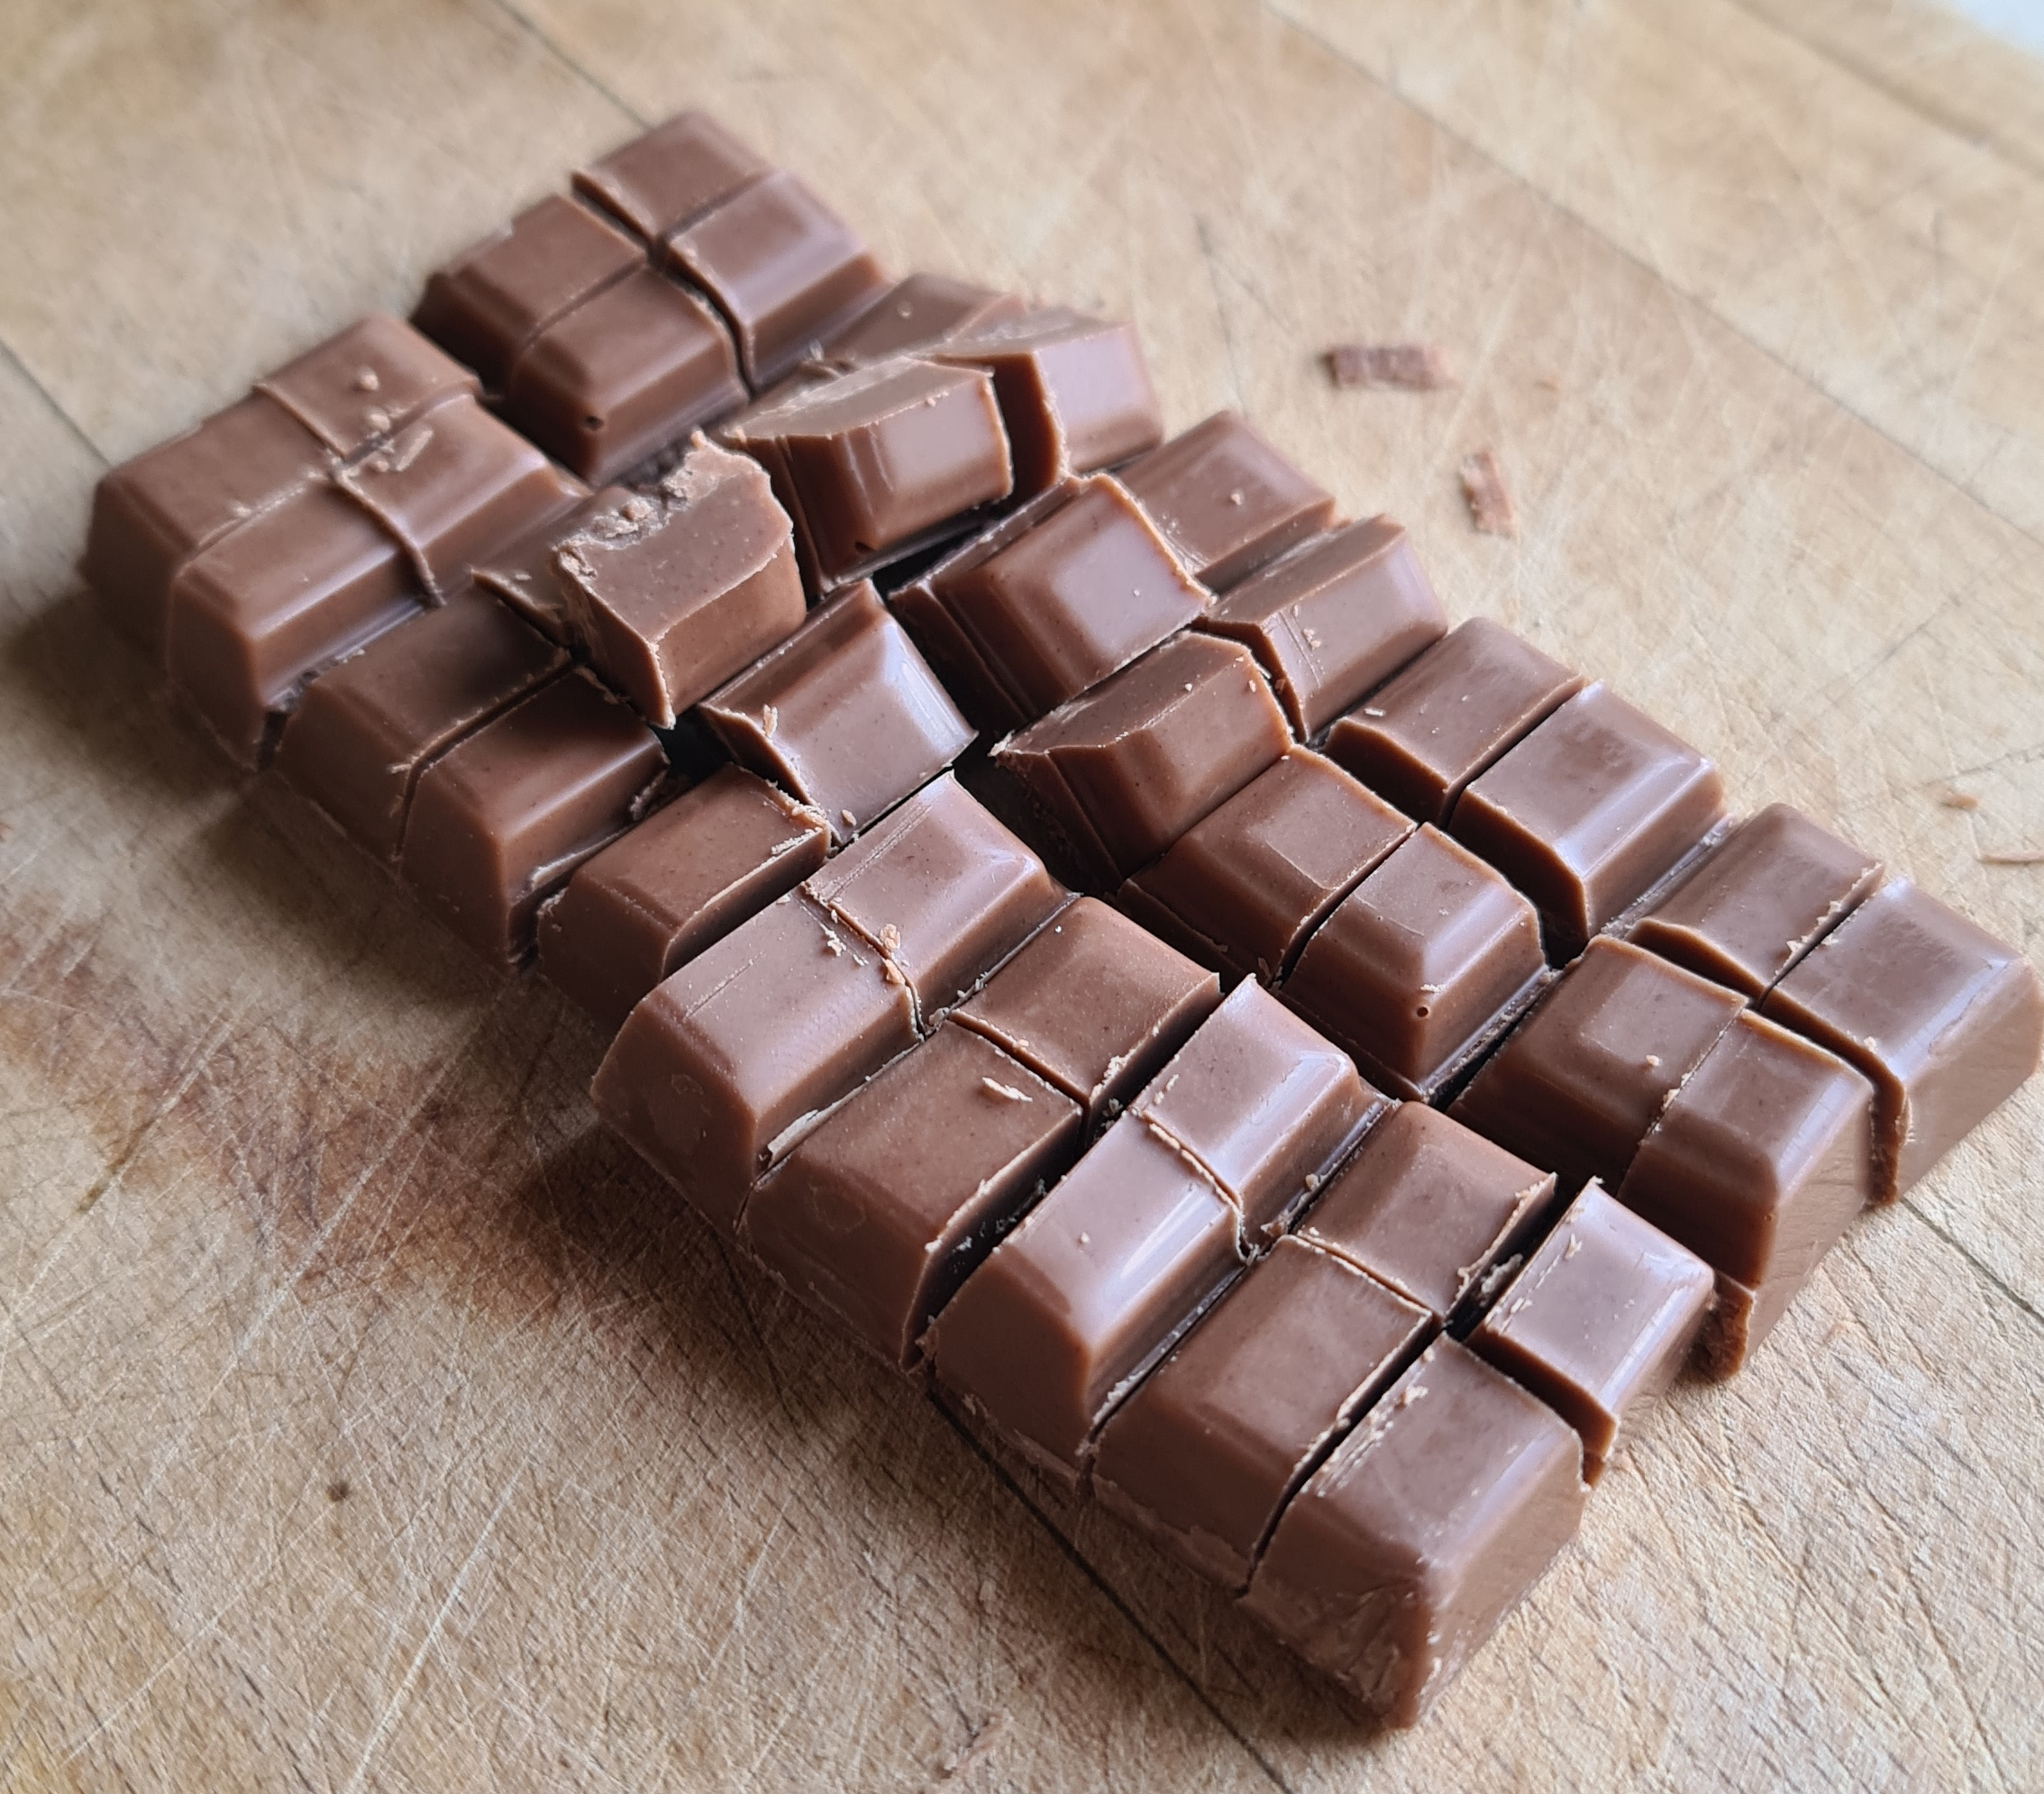 Chocolate cut into small squares